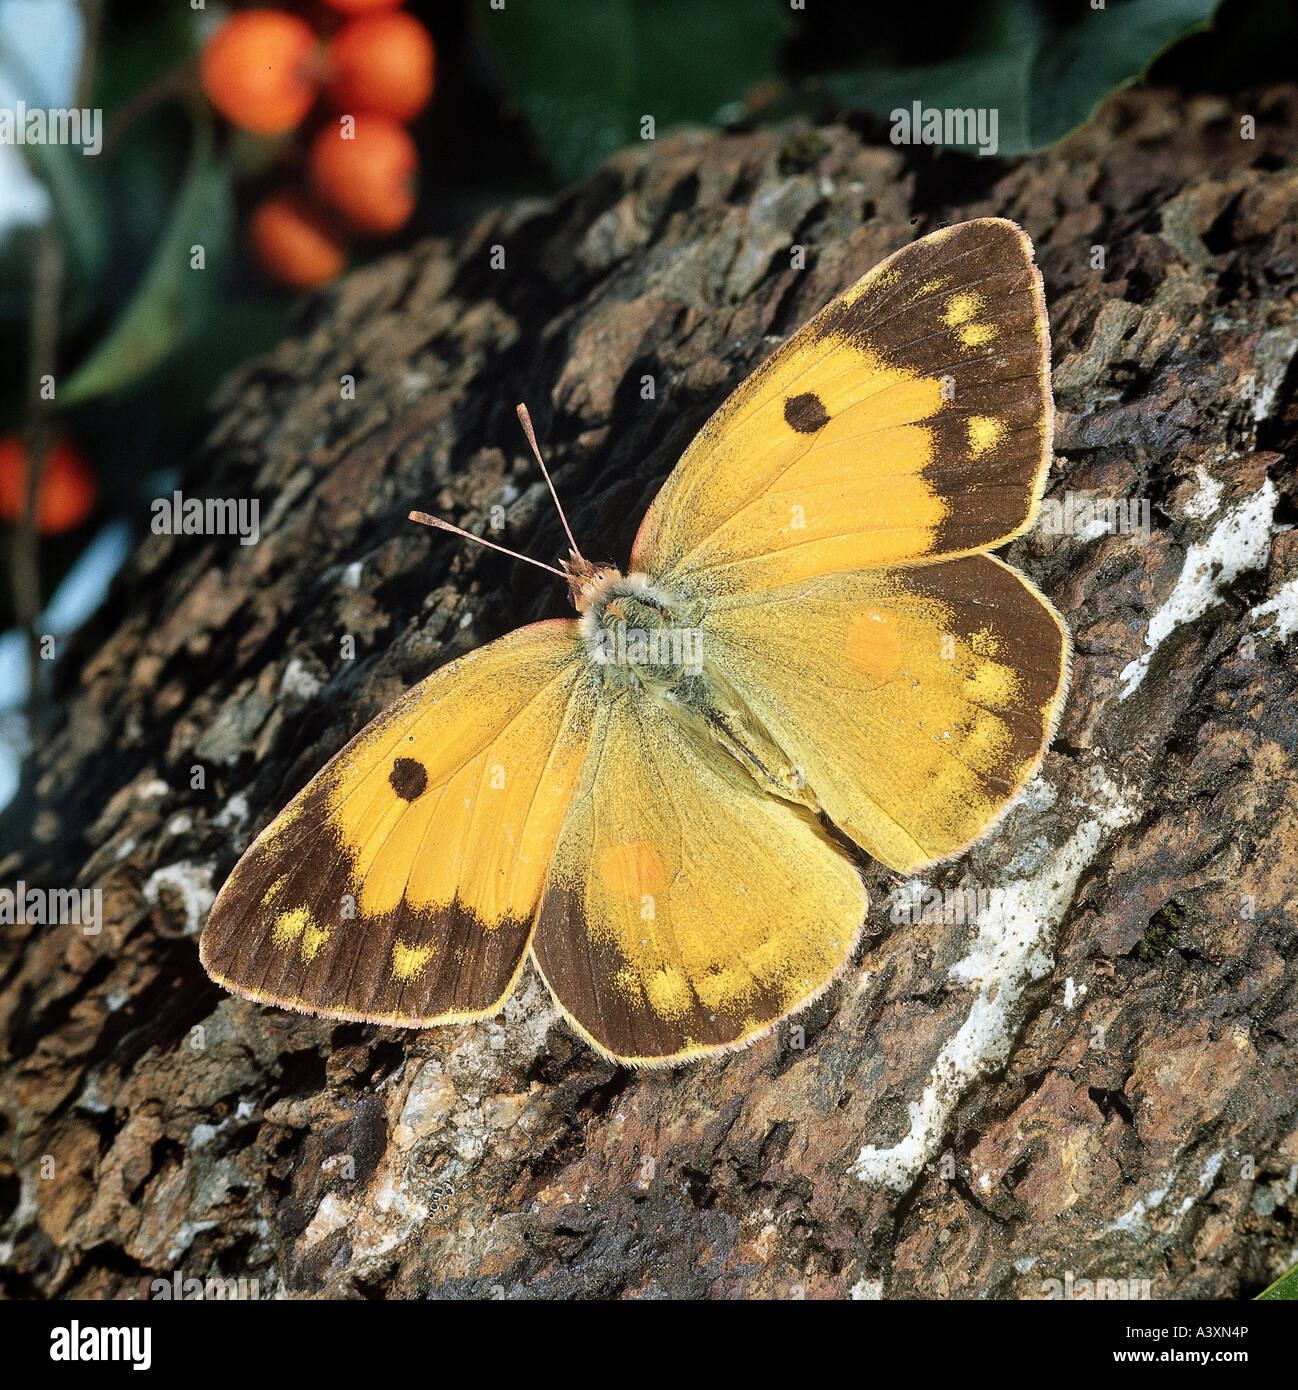 zoology / animals, insect, butterflies, Pale Clouded Yellow, (Colias hyale), at tree bork, distribution: Europe, butterfly, falt Stock Photo